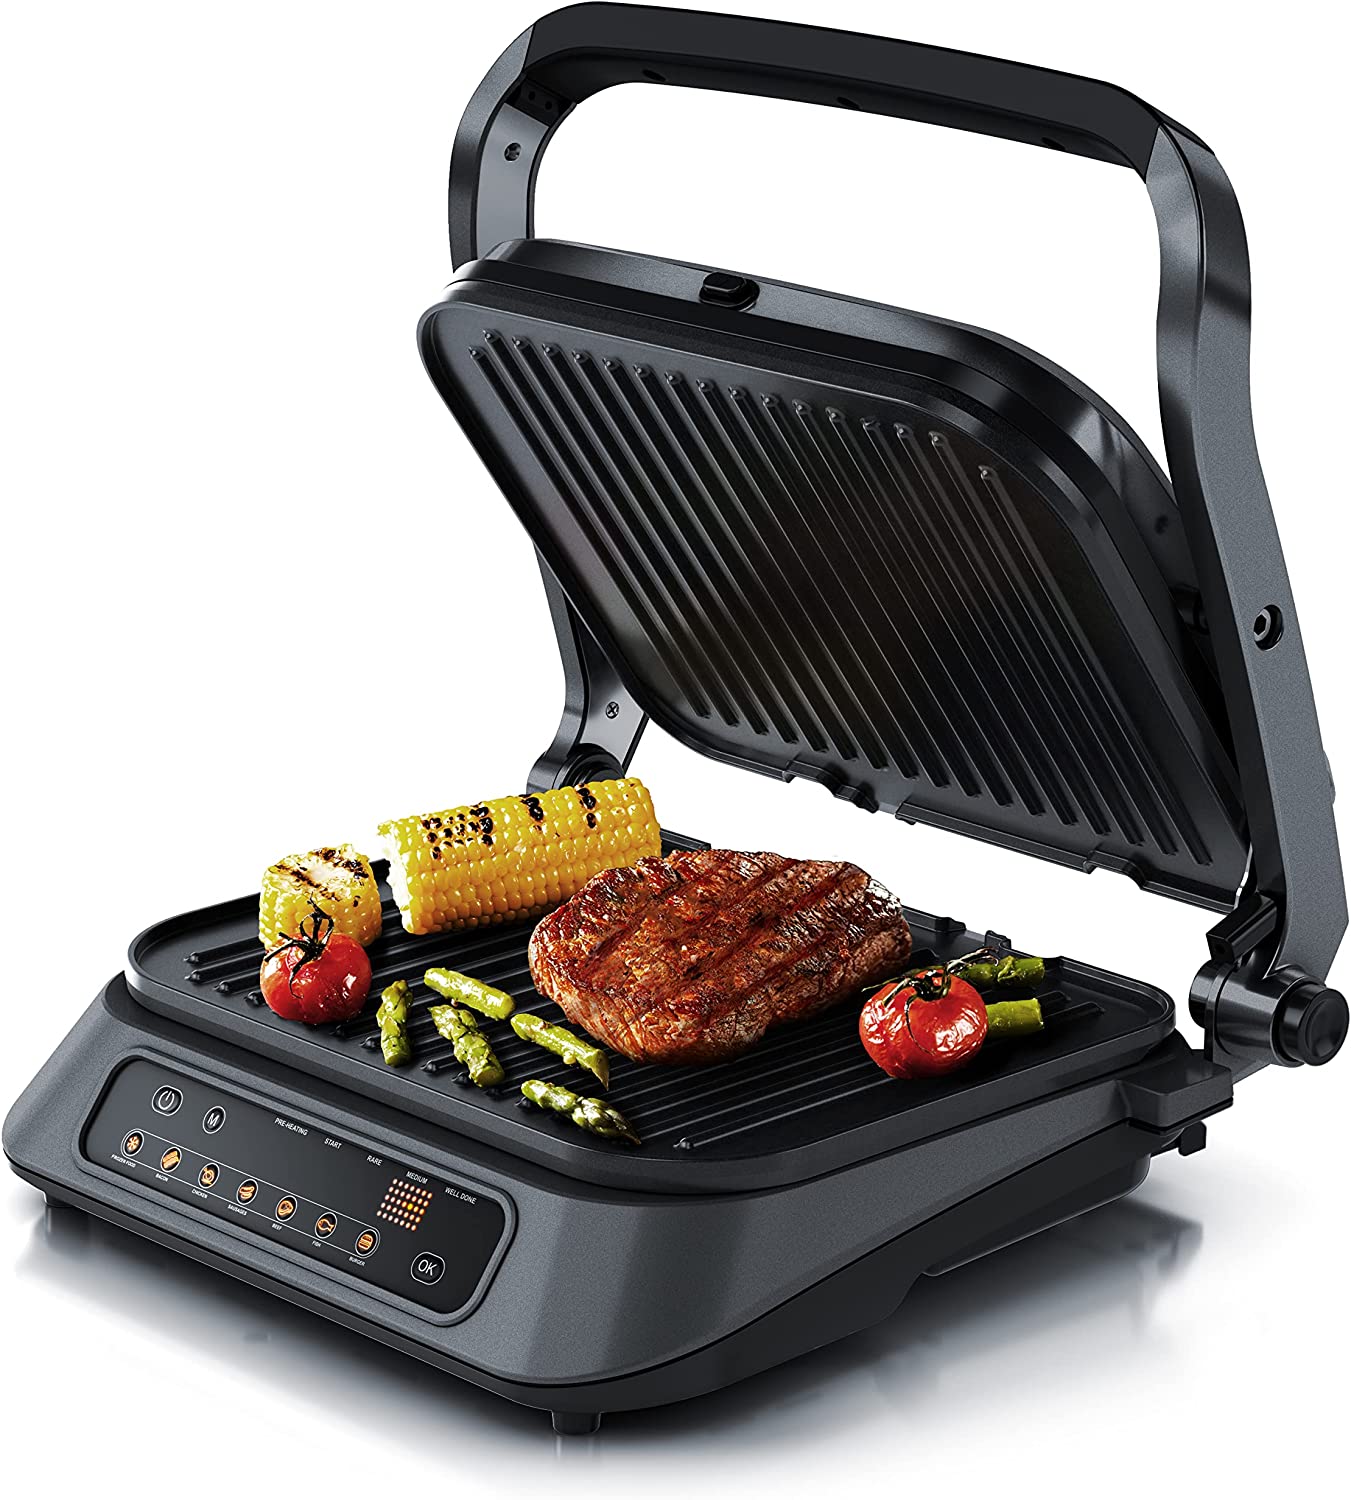 Arendo contact grill, electric grill with digital control, 1900 W, electric table grill sandwich maker, 7 programmes, non-stick coated stainless steel